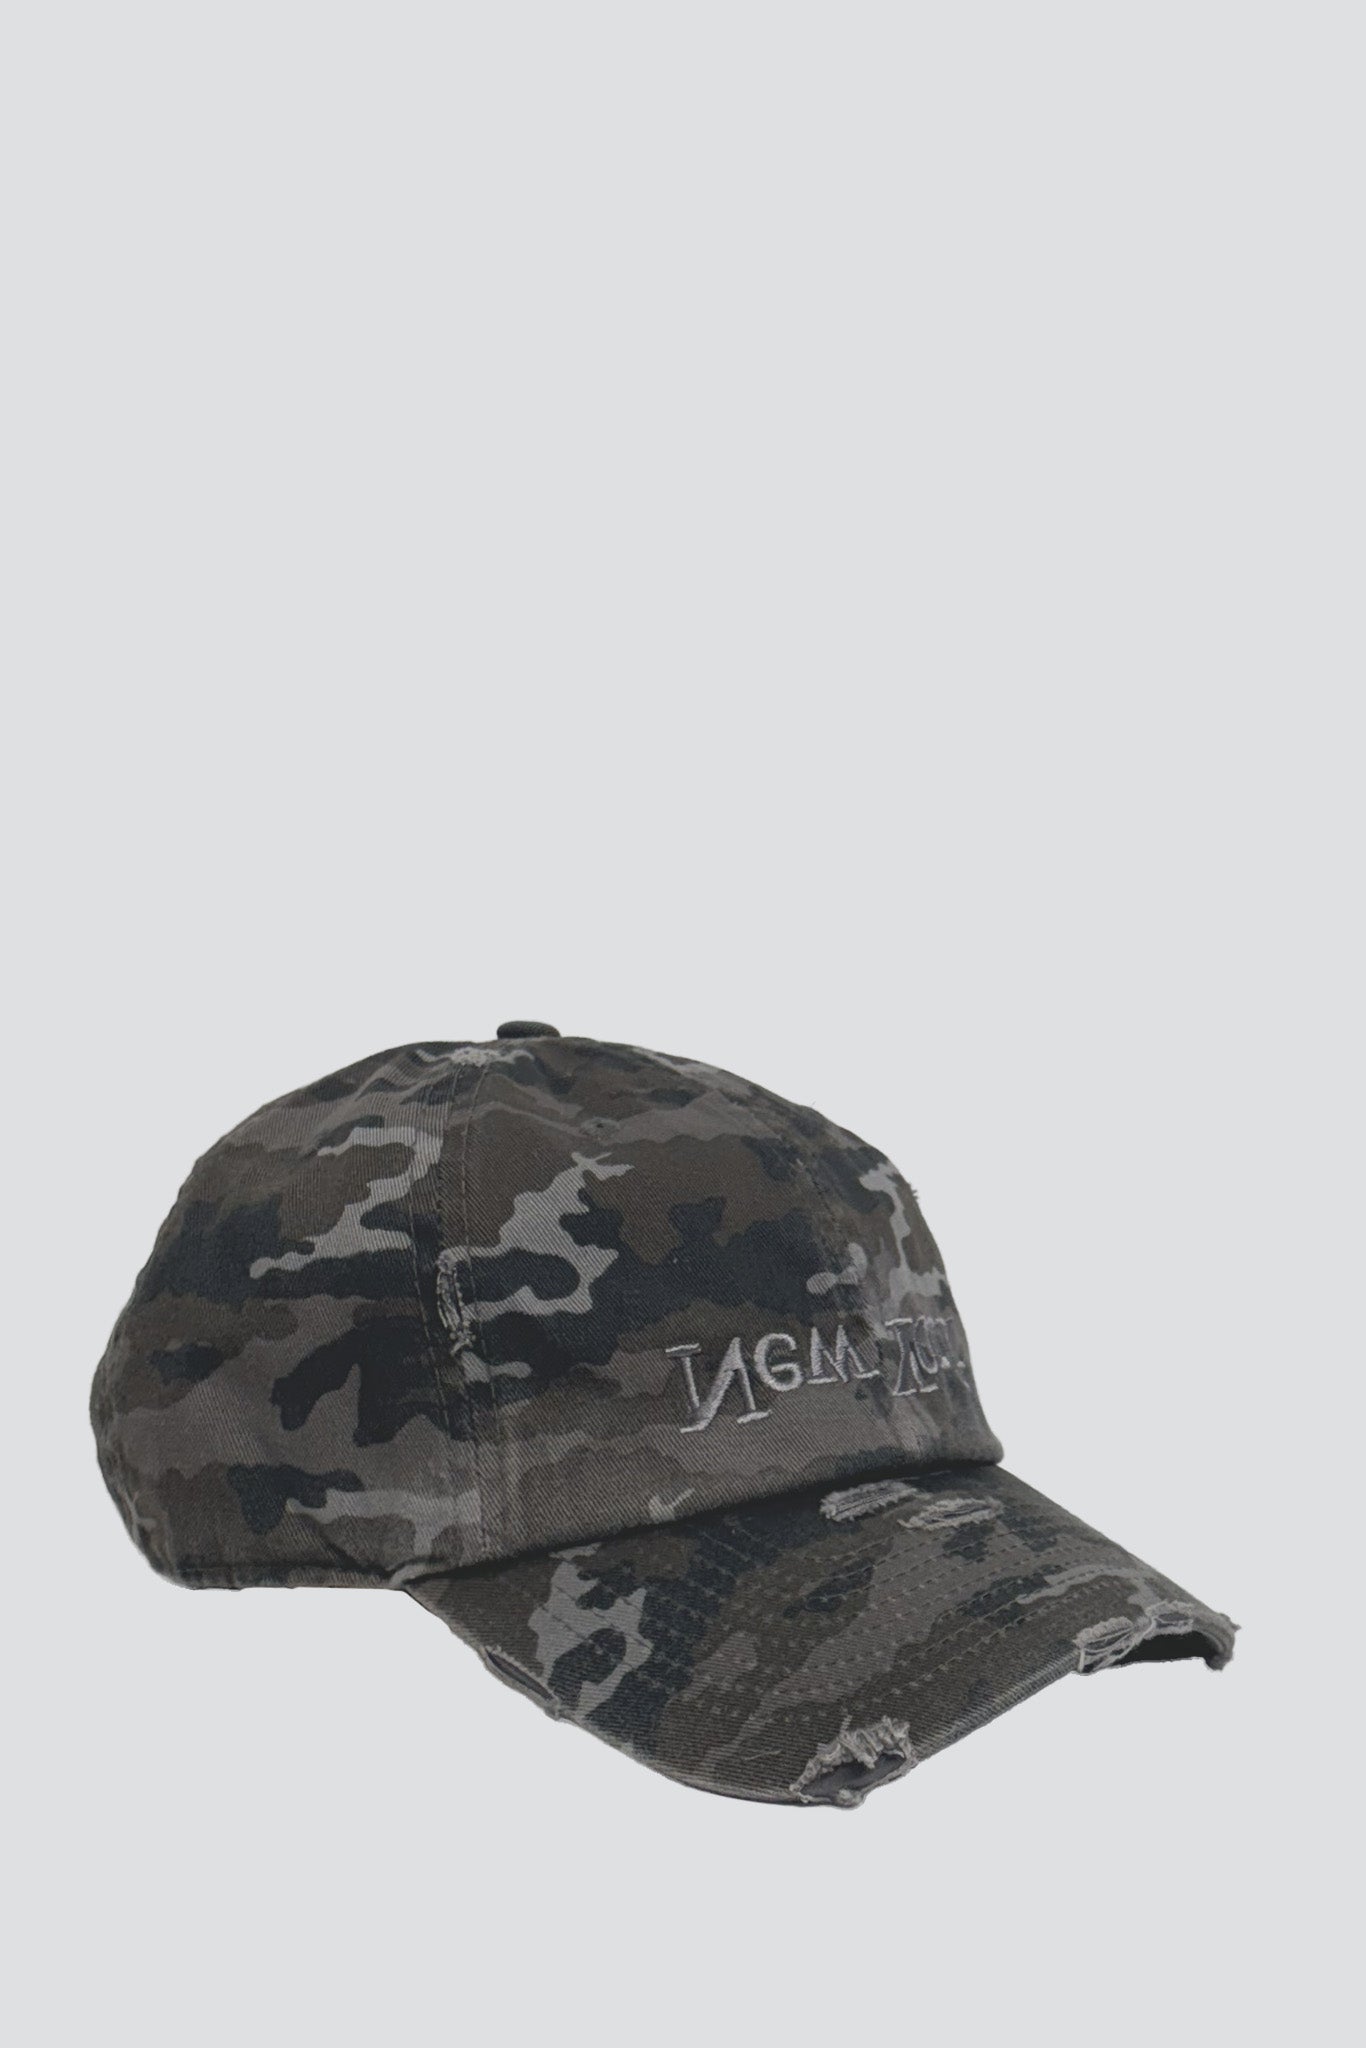 Distressed New York Embroidered Hat - Black Camo